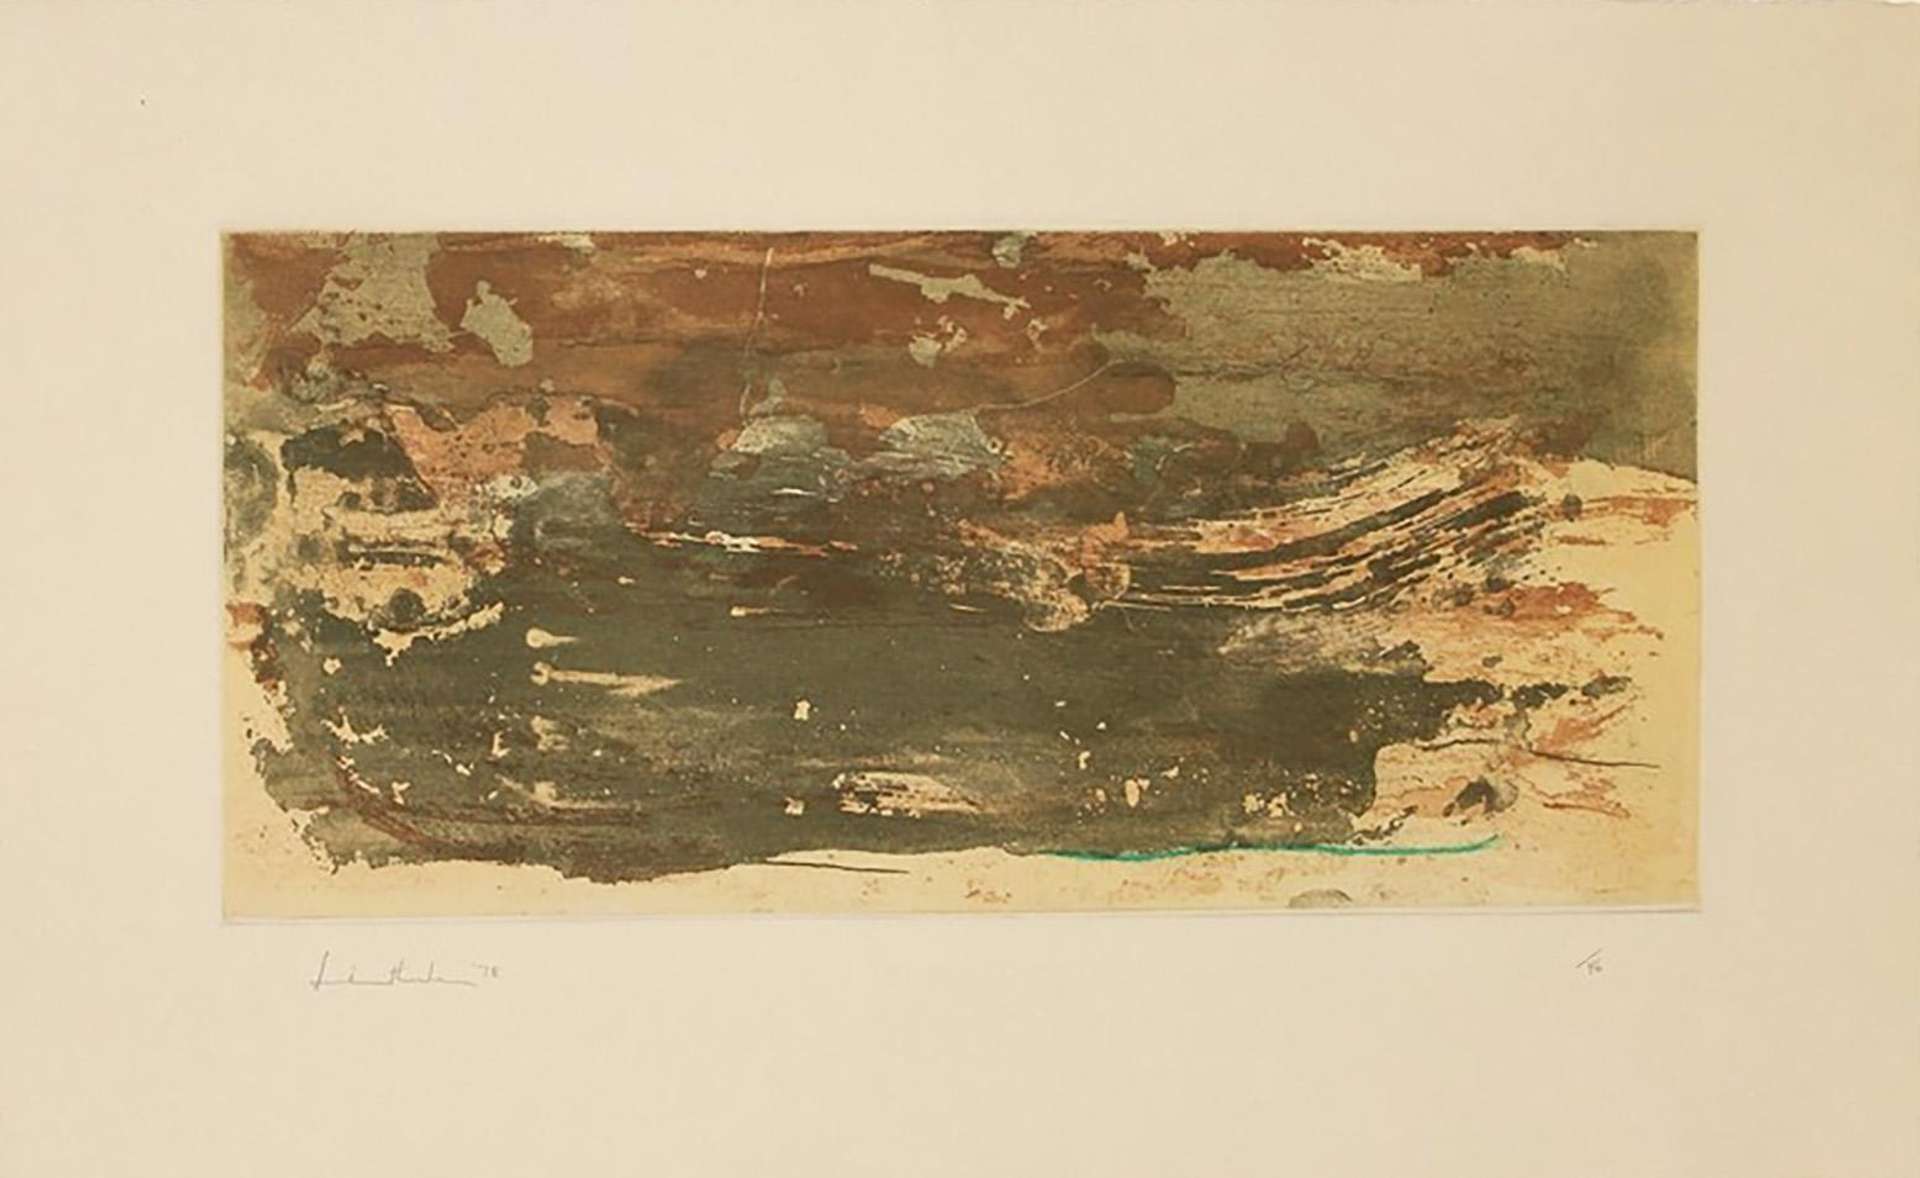 Helen Frankenthaler’s Earth Slice. An abstract expressionist intaglio print of a landscape of earth tones.